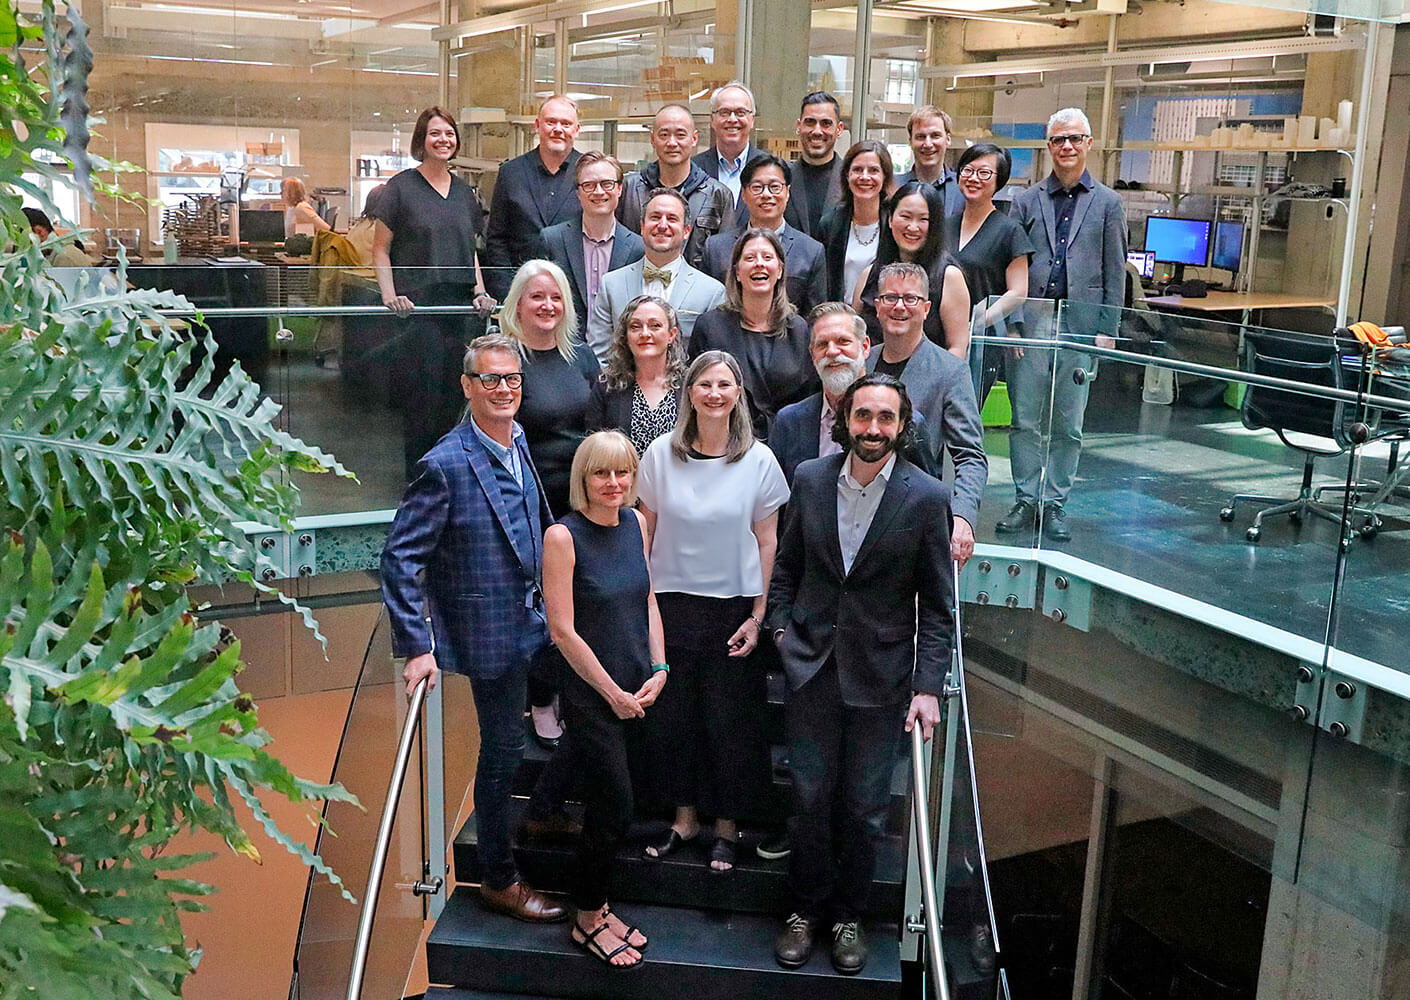 A photo of the Vancouver leadership group standing on the stair in the atrium of the Vancouver studio.